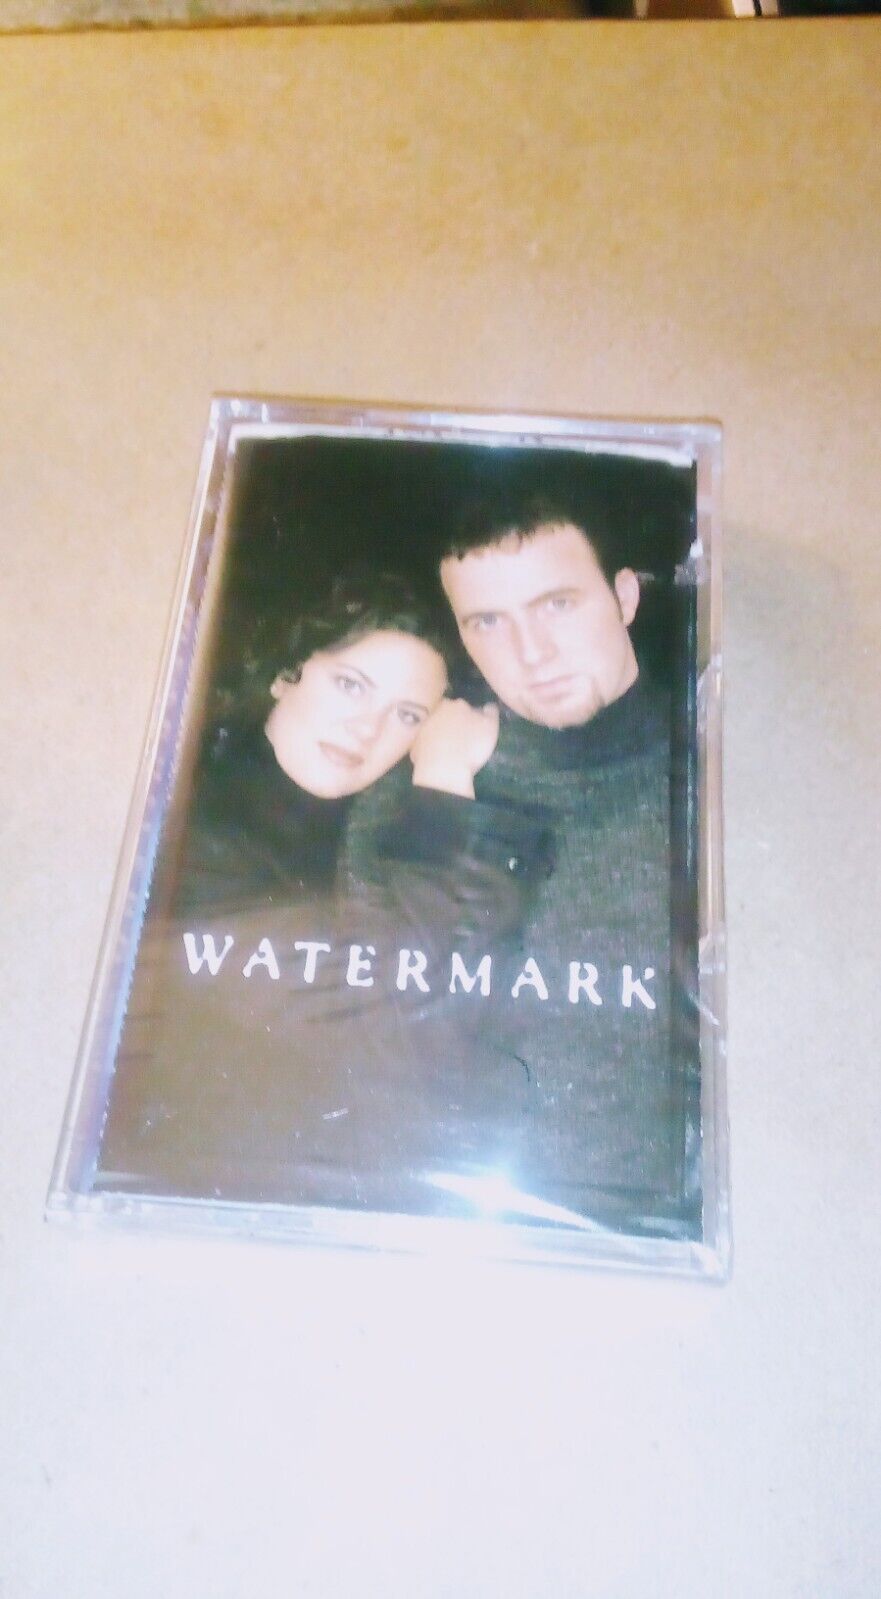 WATERMARK by Watermark (Cassette) Contemporary Christian Sealed New